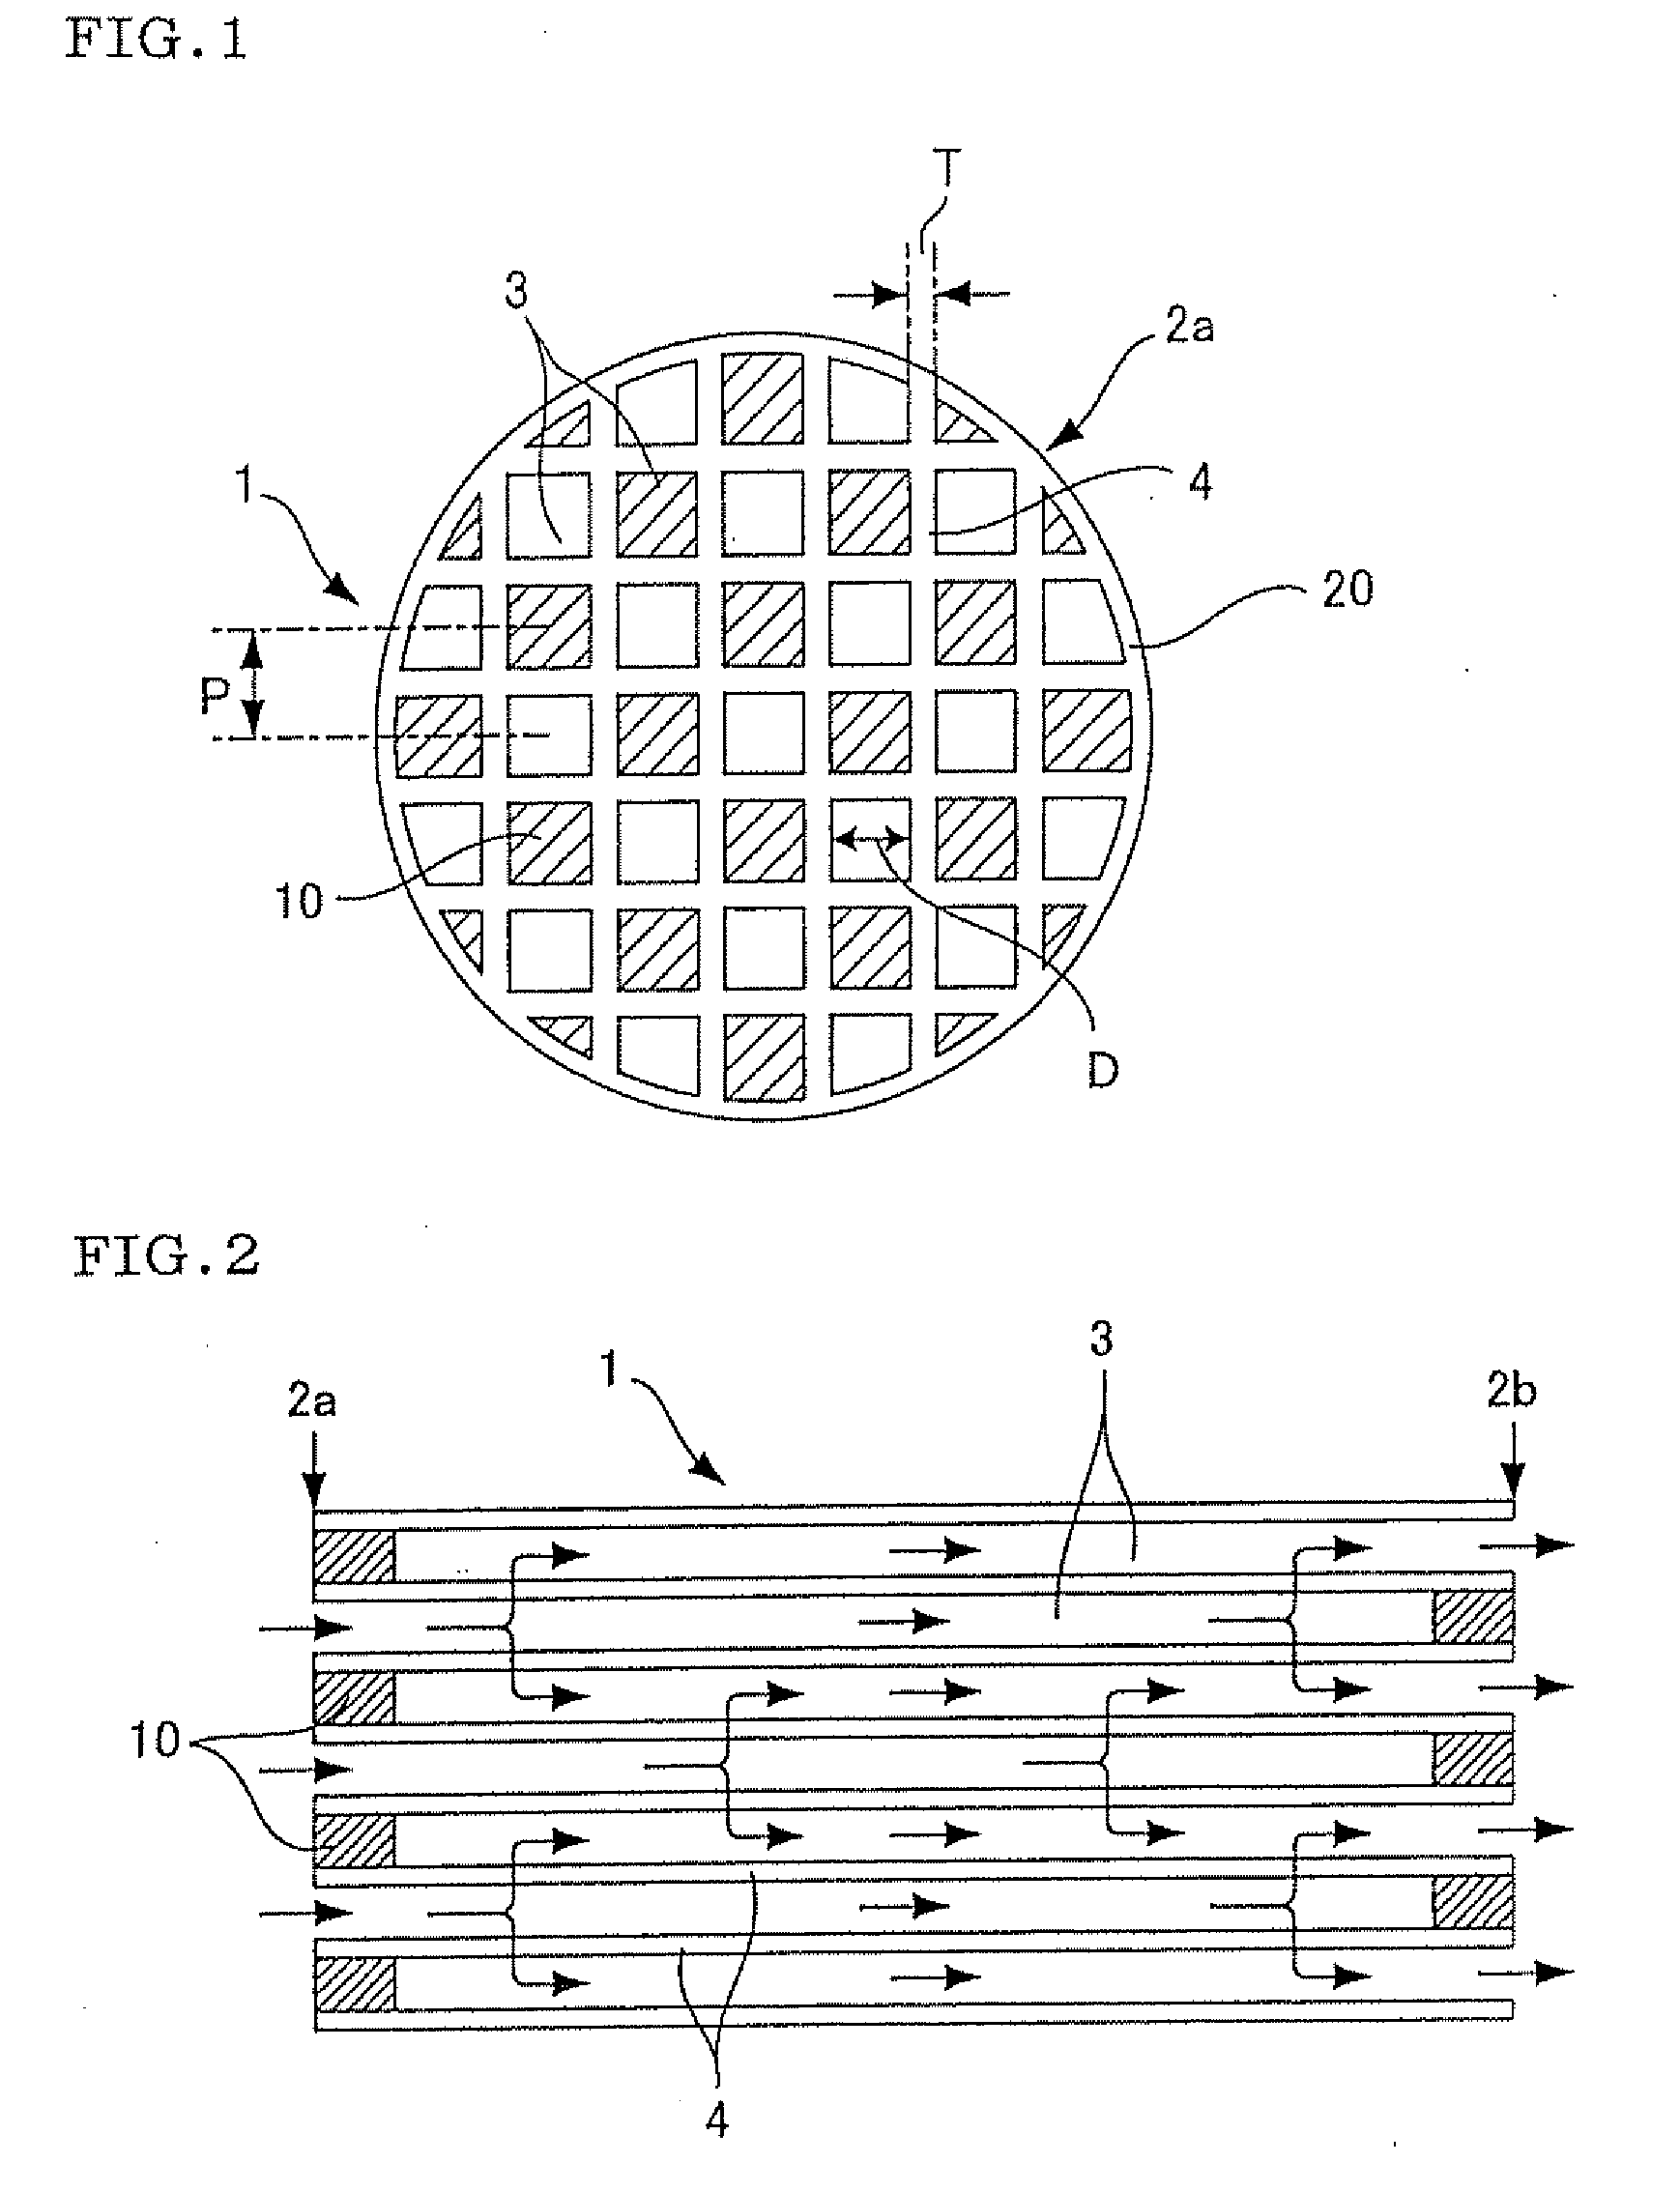 Ceramic structure and process for producing the same